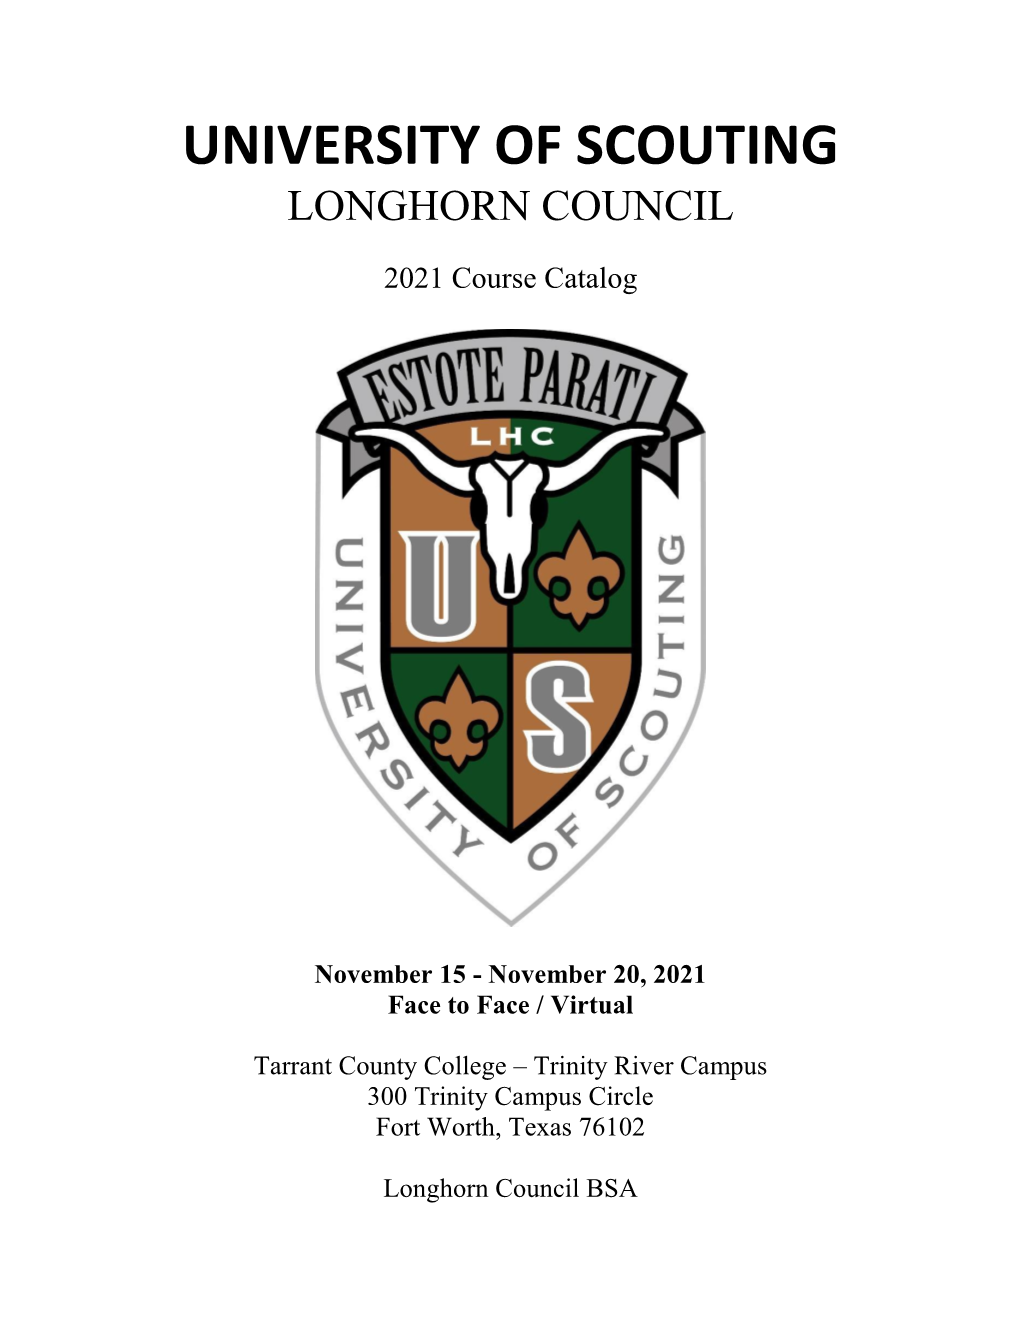 University of Scouting Longhorn Council